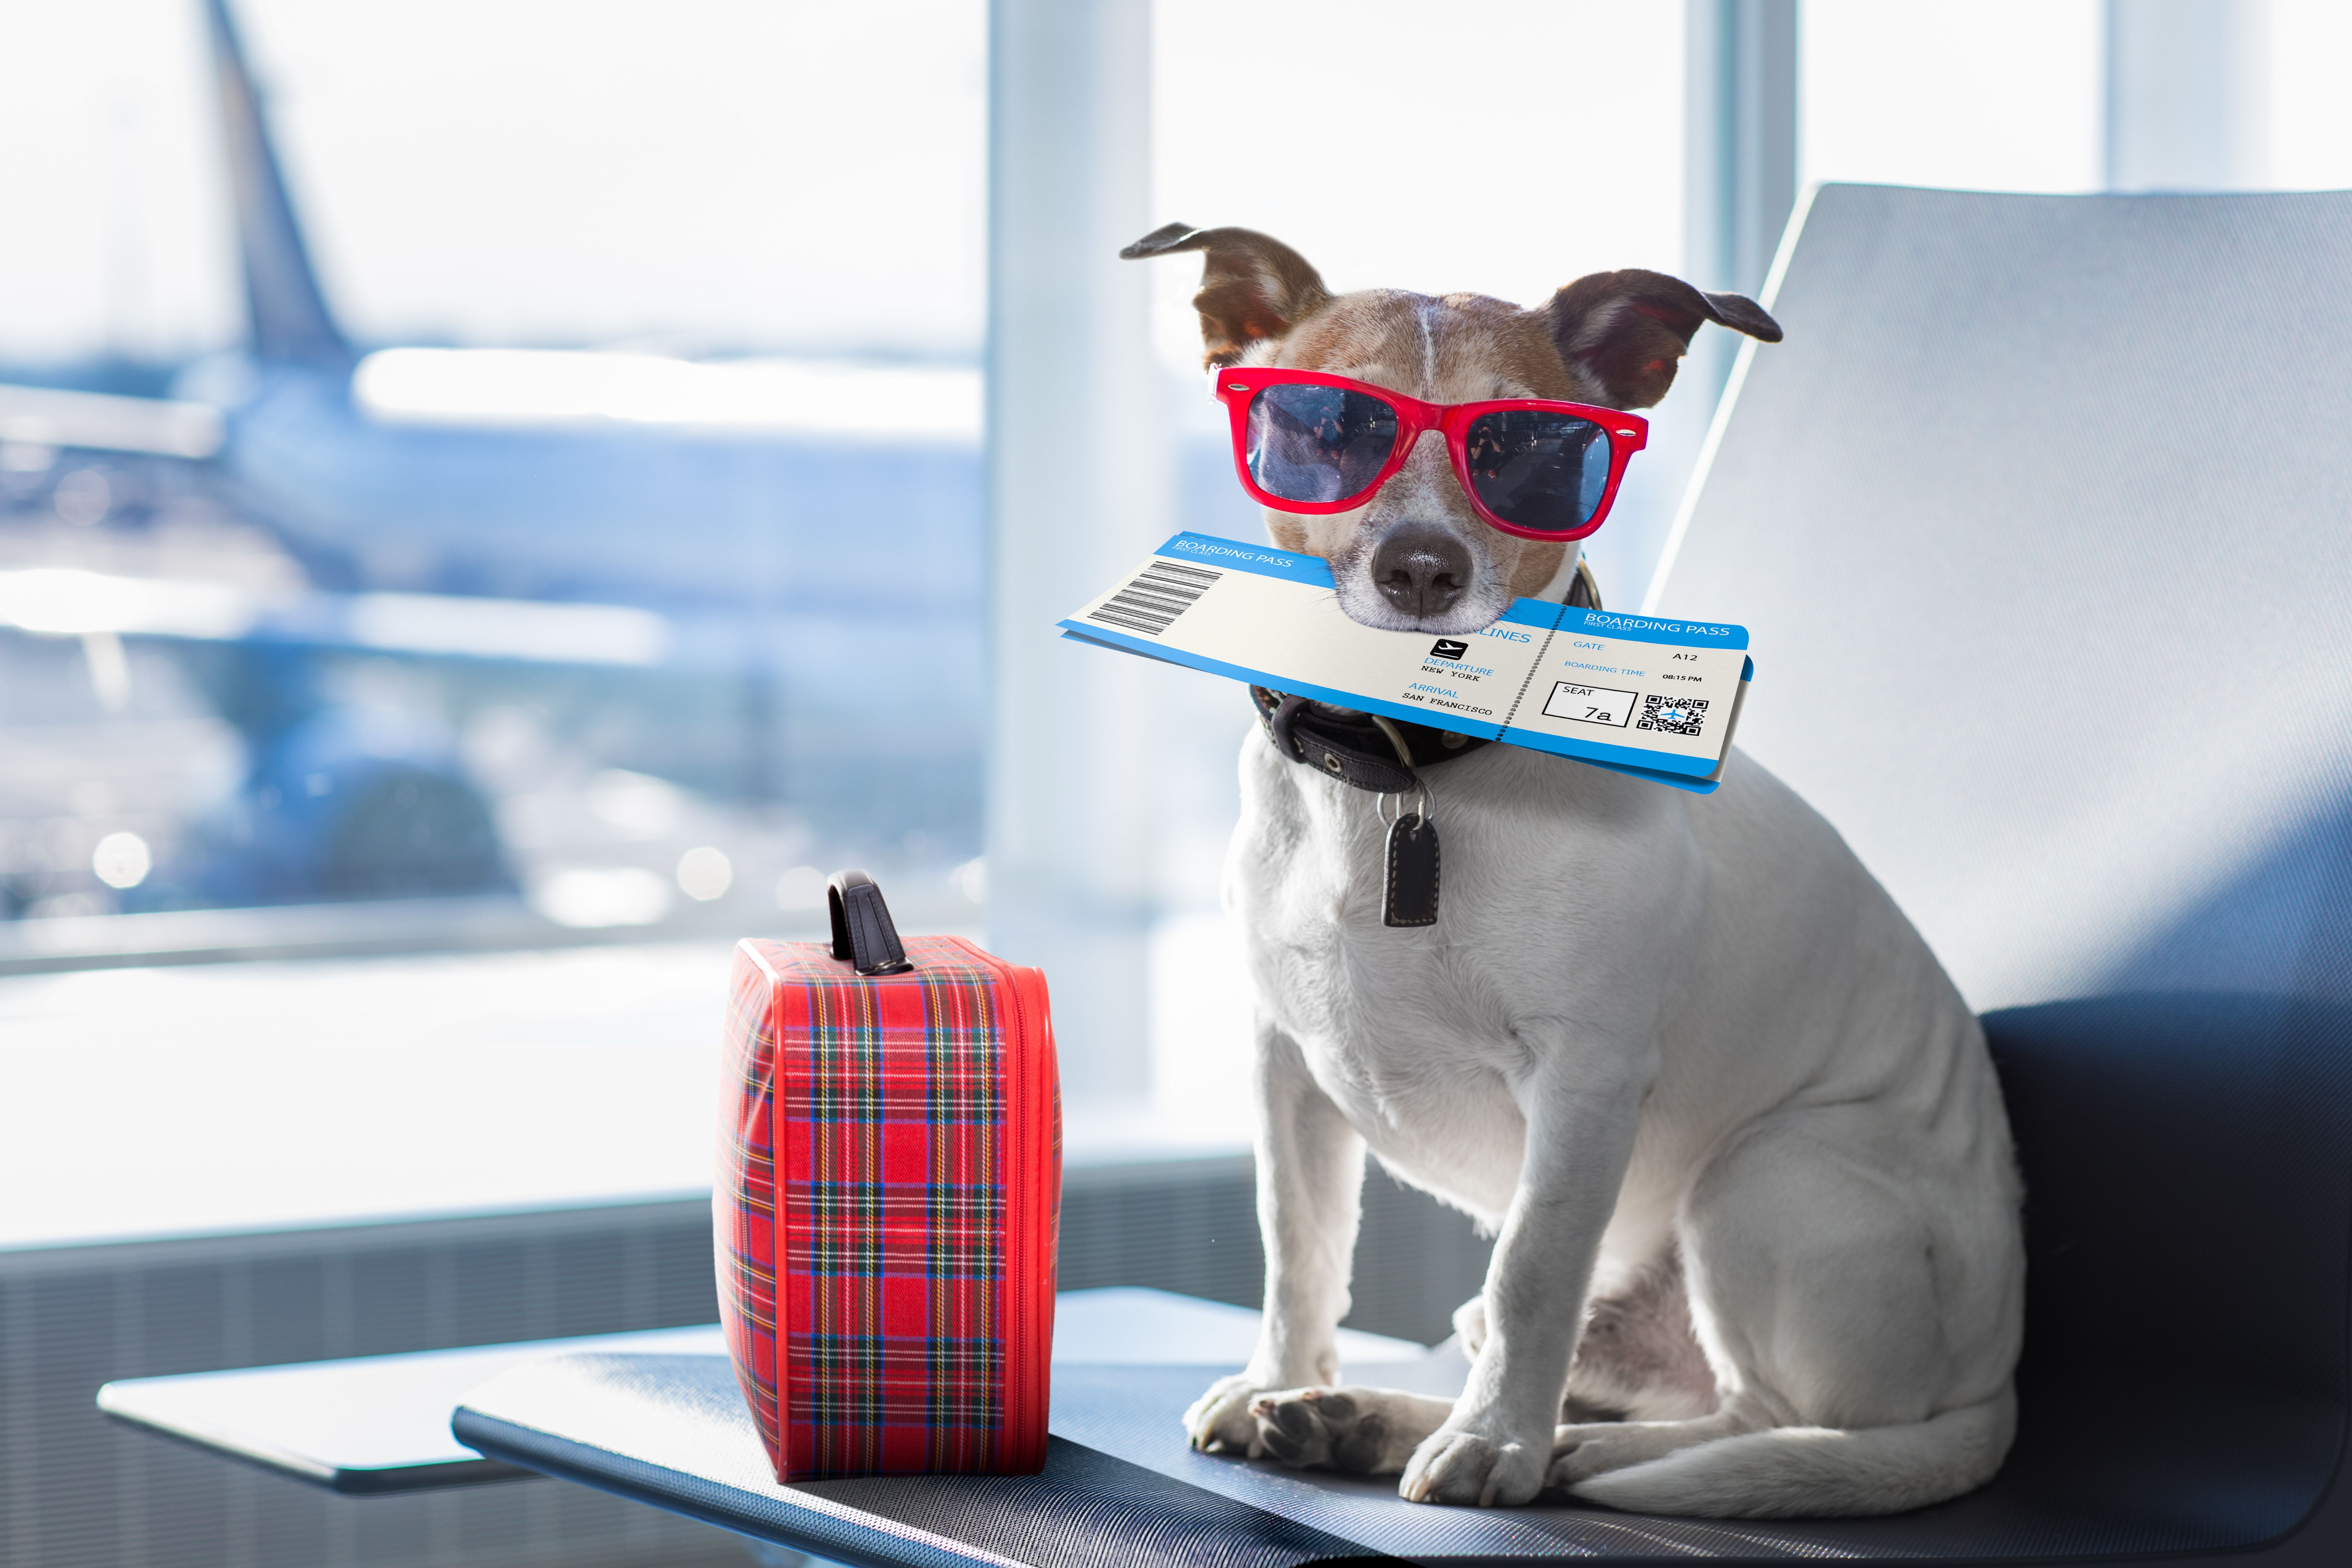 A dog sitting in a passenger terminal with sunglasses and a suitcase.